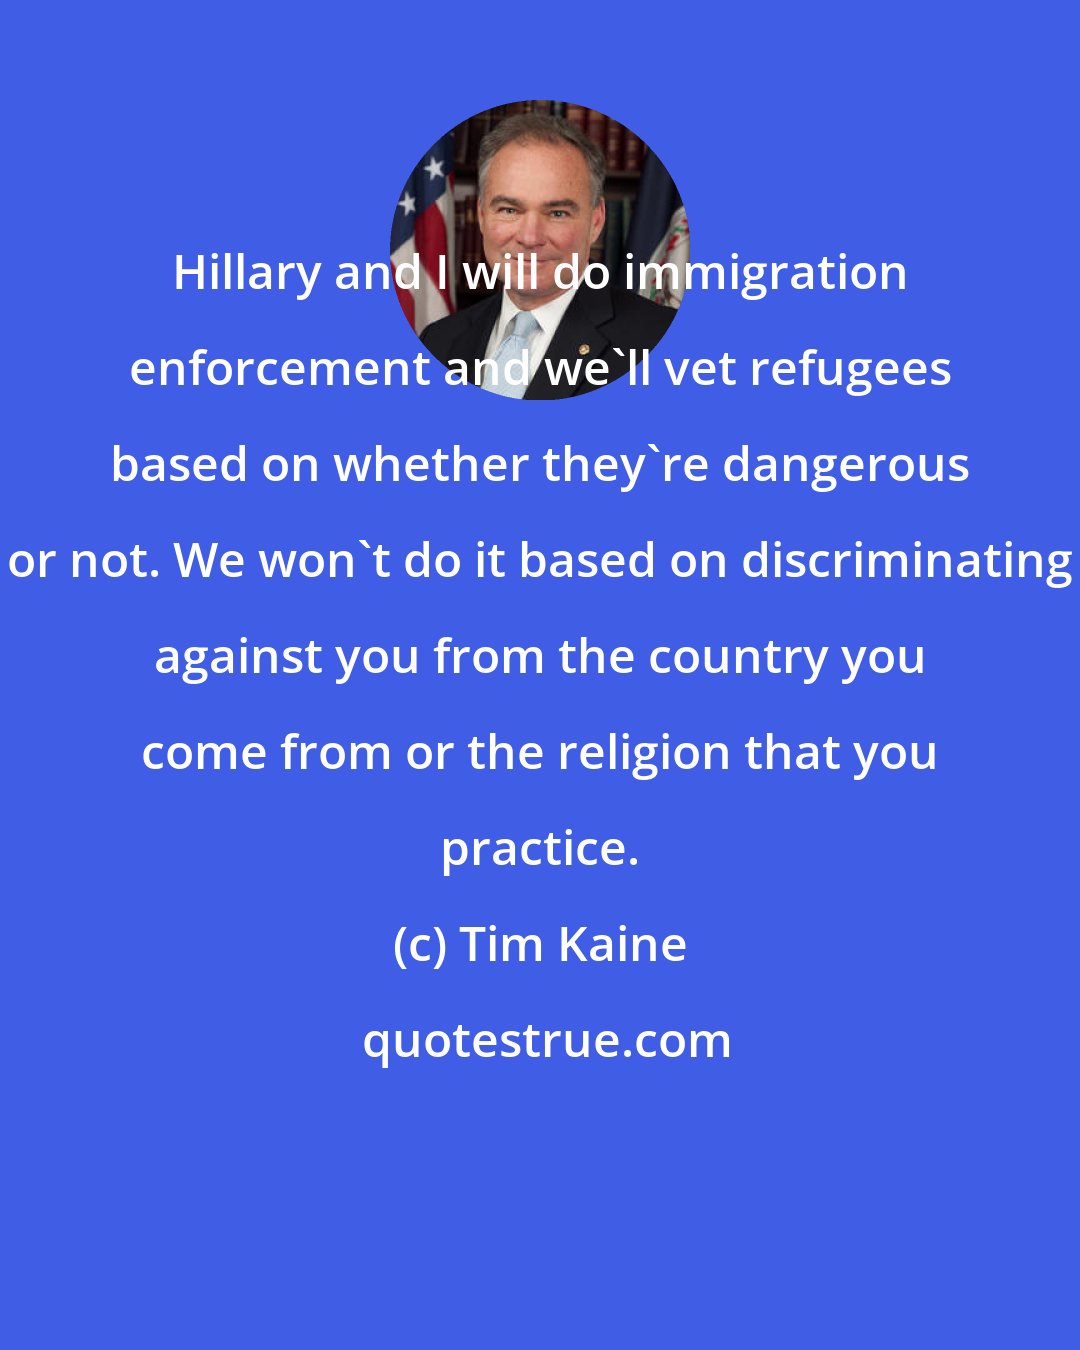 Tim Kaine: Hillary and I will do immigration enforcement and we'll vet refugees based on whether they're dangerous or not. We won't do it based on discriminating against you from the country you come from or the religion that you practice.